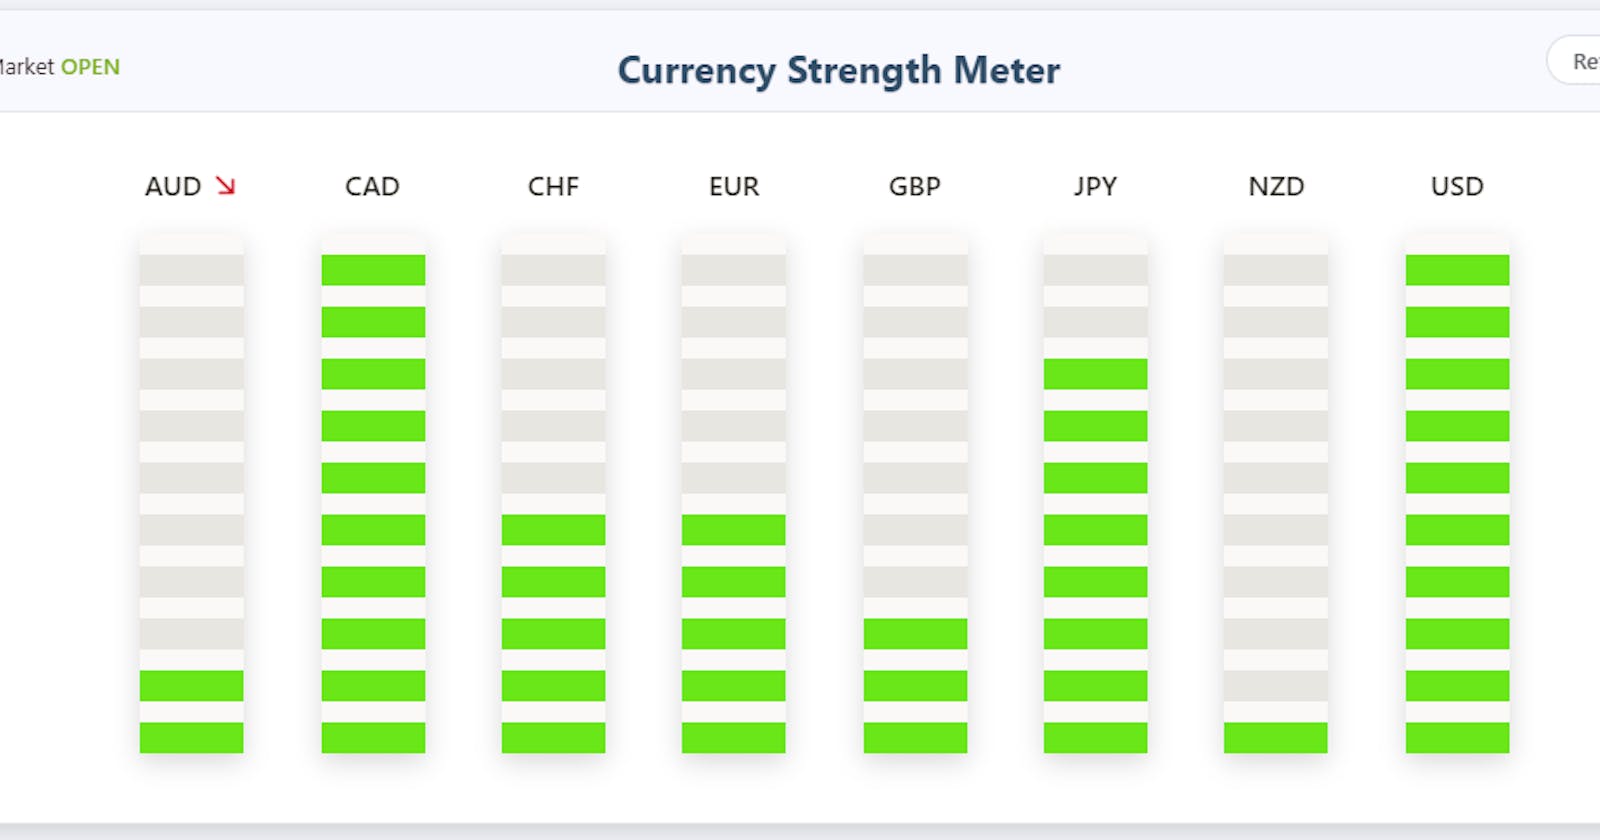 Currency Strength Meter - Is it really the best currency tool?